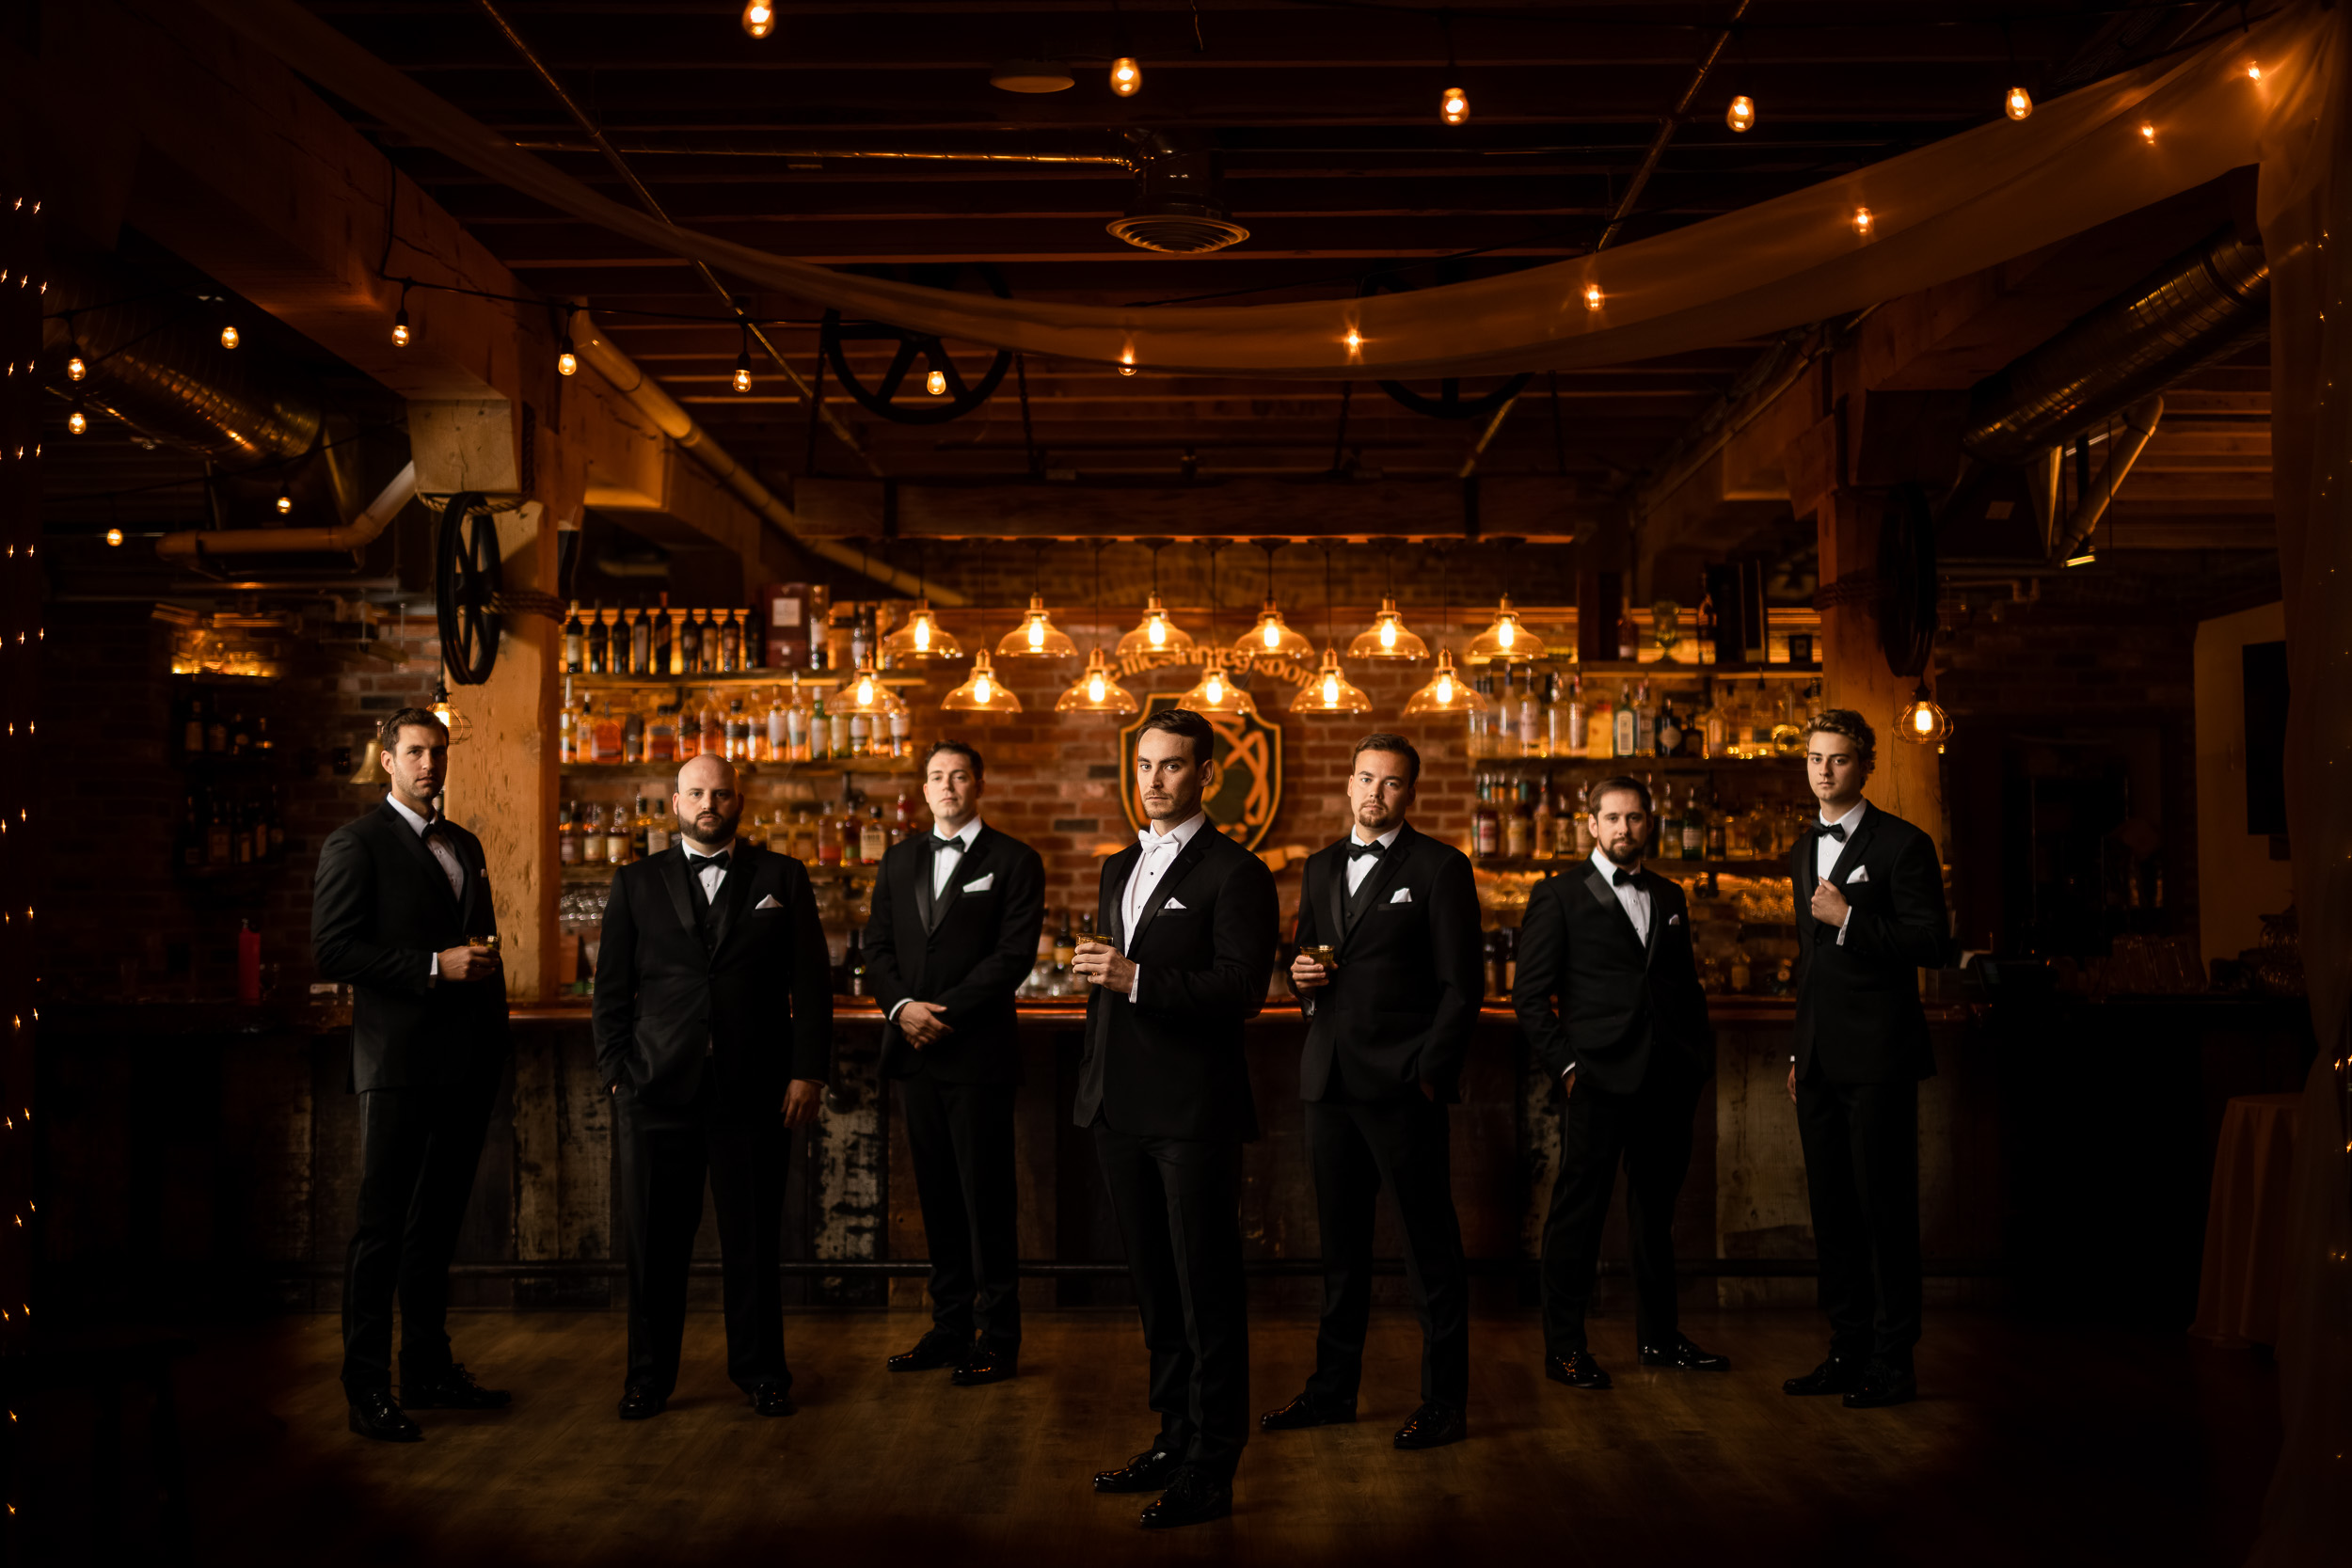 The groom and groomsmen posing in a bar